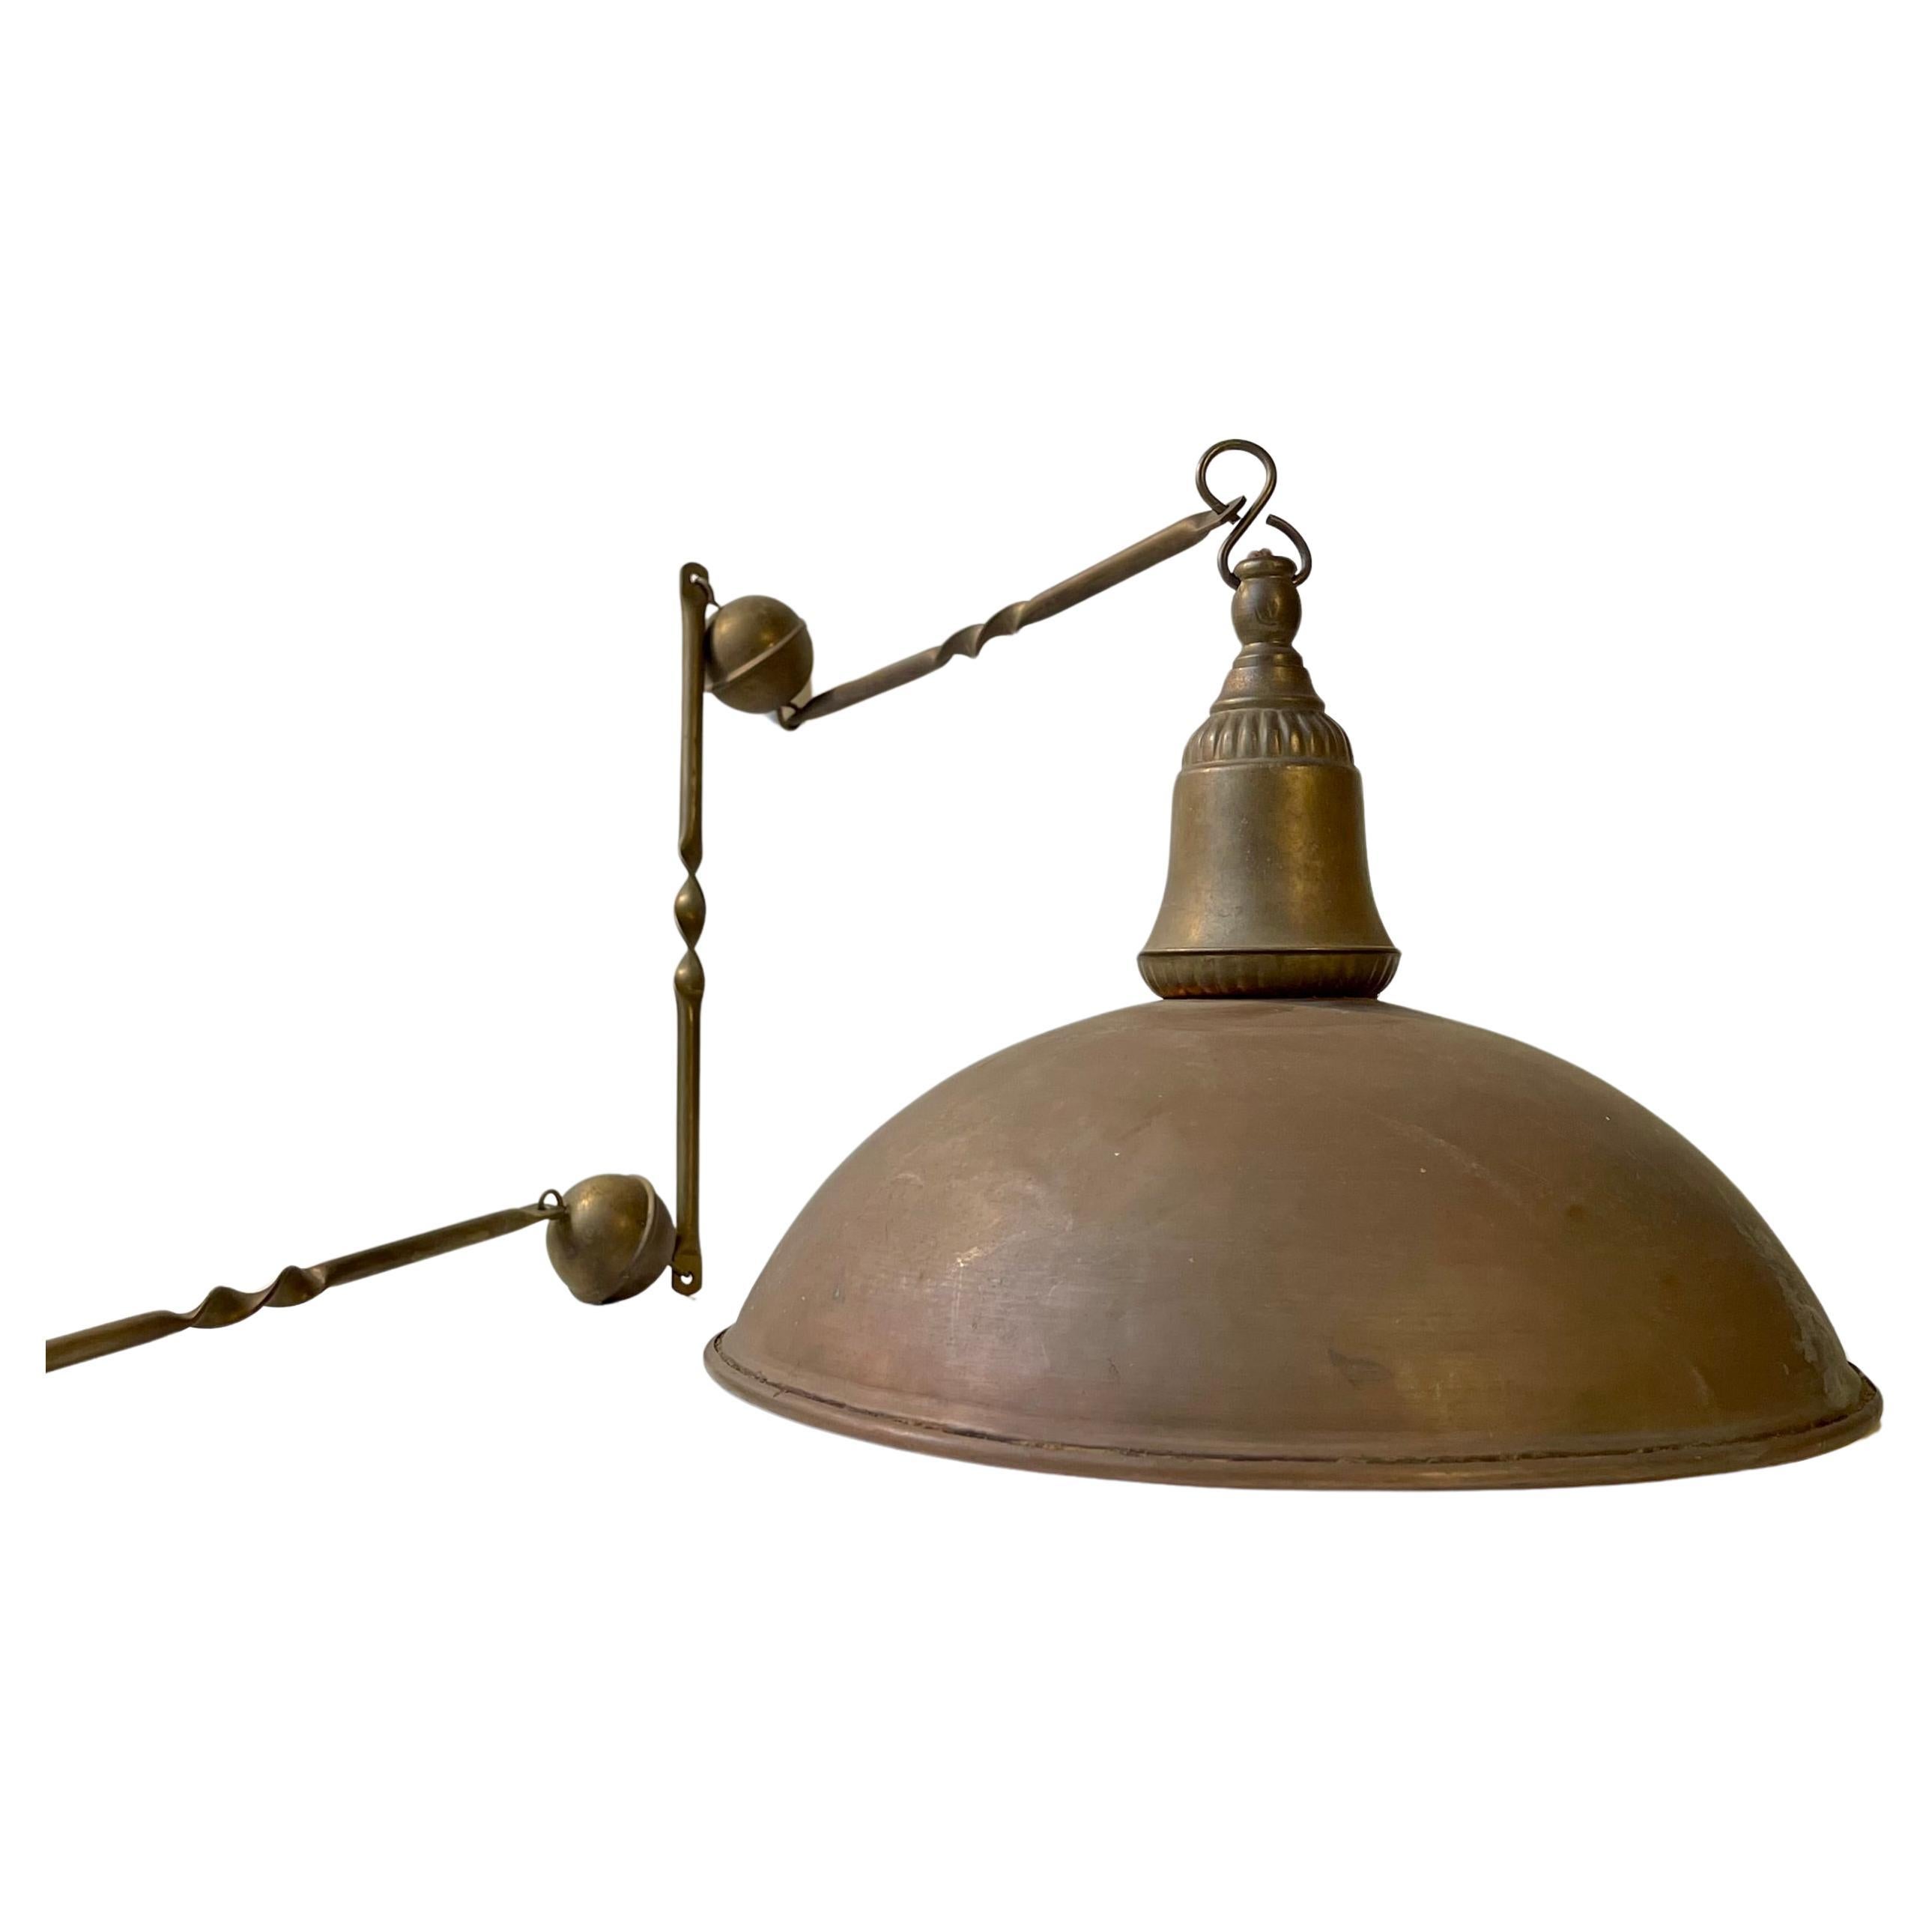 Nautical Chain Suspended Hanging Lamp in Brass and Copper, 1930s For Sale